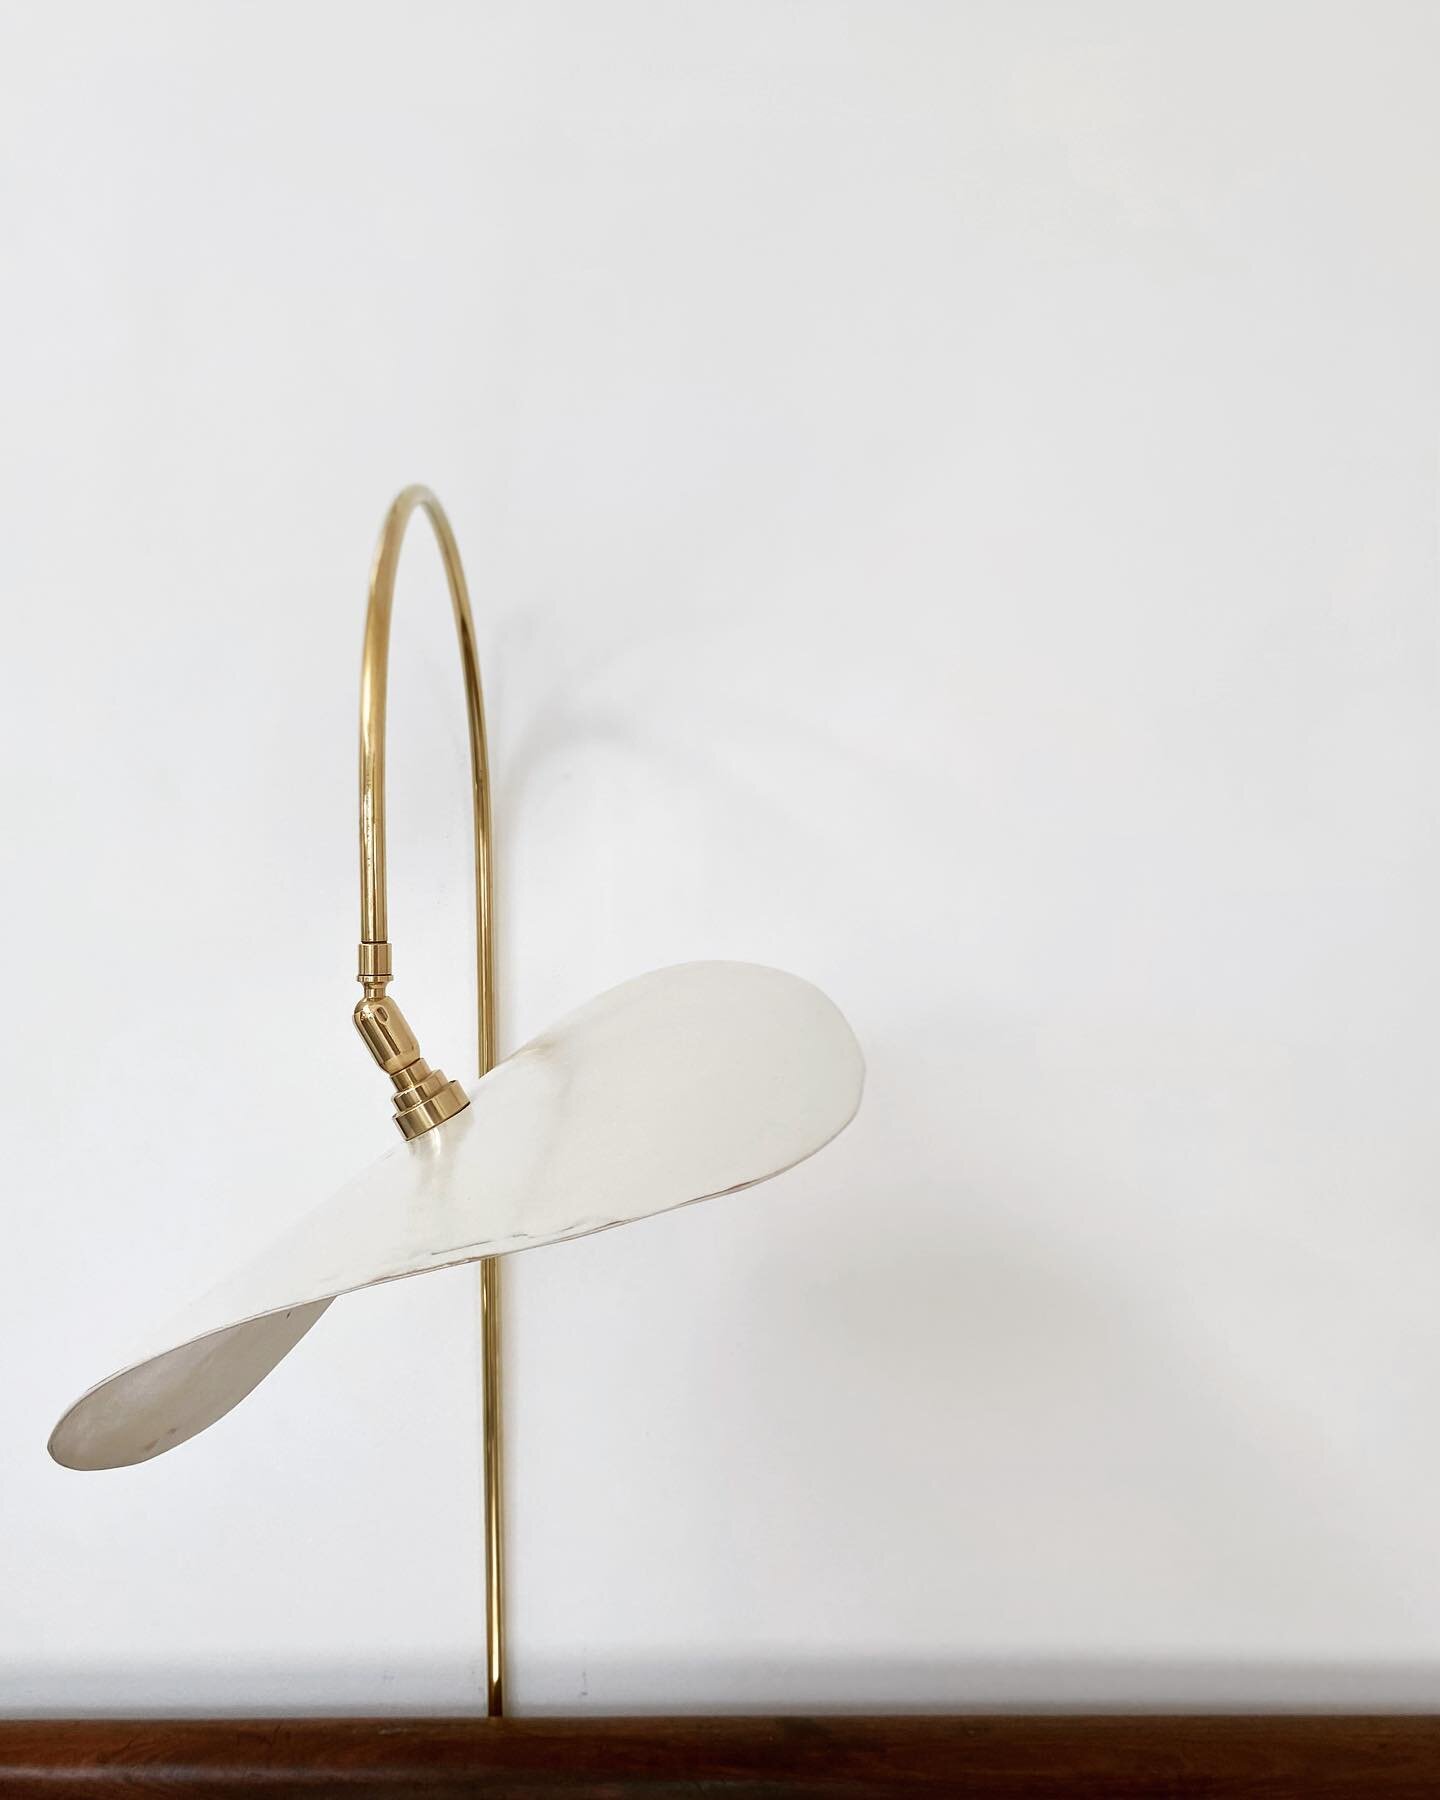 Honesty.
Is a hand curved and hand carved and sanded plywood form, with a gesso shell, sanded back and a beeswax polish.
It&rsquo;s a walllight.
On a curved stem of polished brass.
Beautiful pared back simplicity, refine, refine
#light
#honourmateria